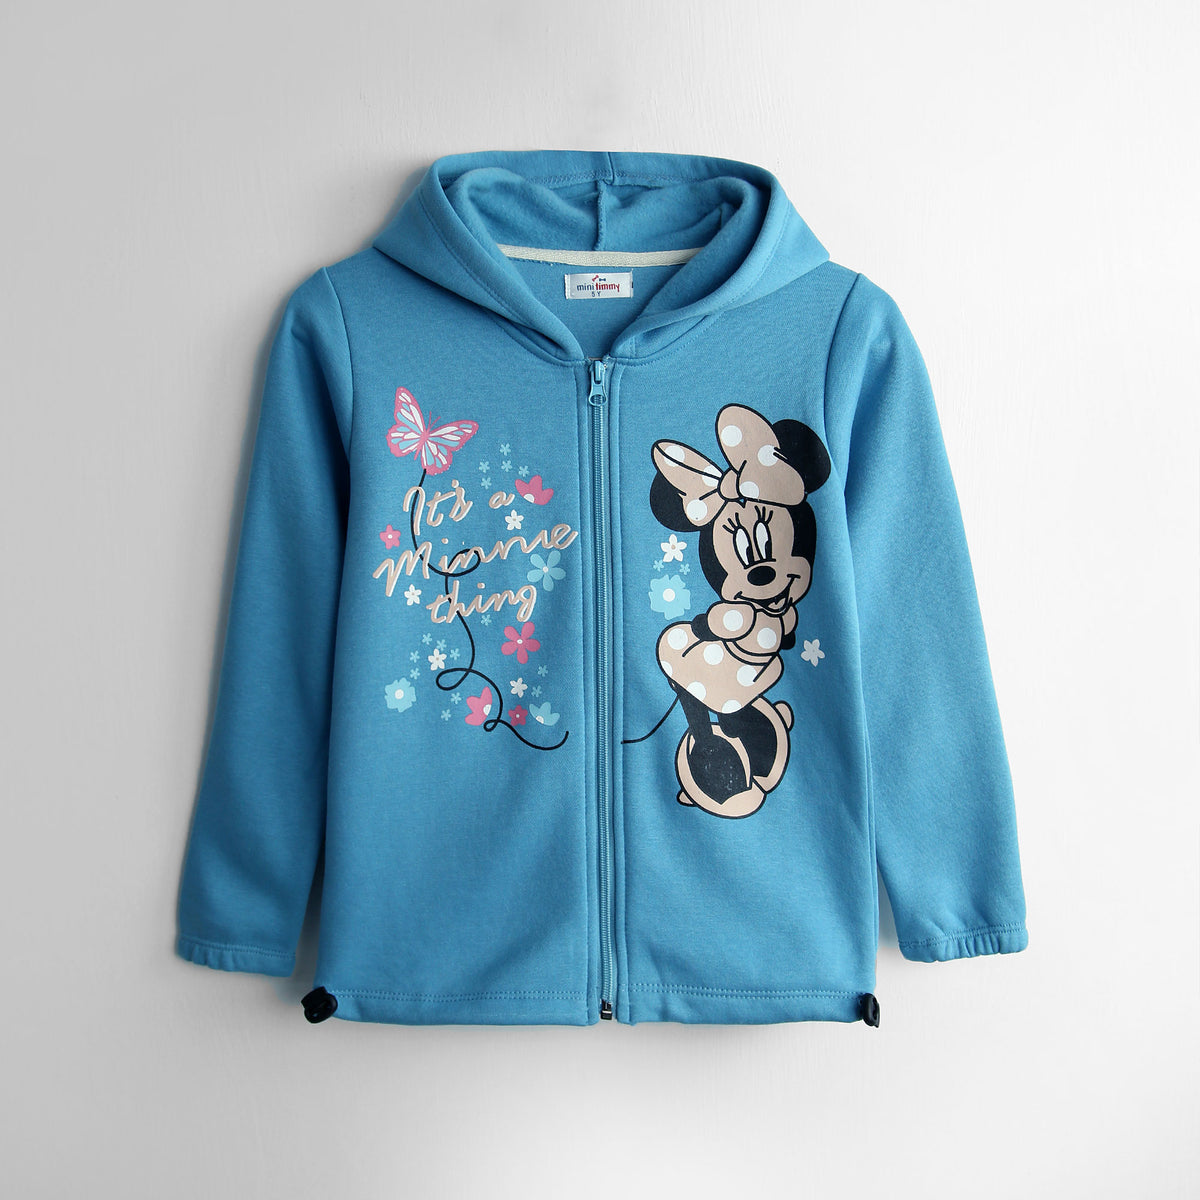 Girls Minnie Mouse Printed Soft Cotton Fleece Hoodie